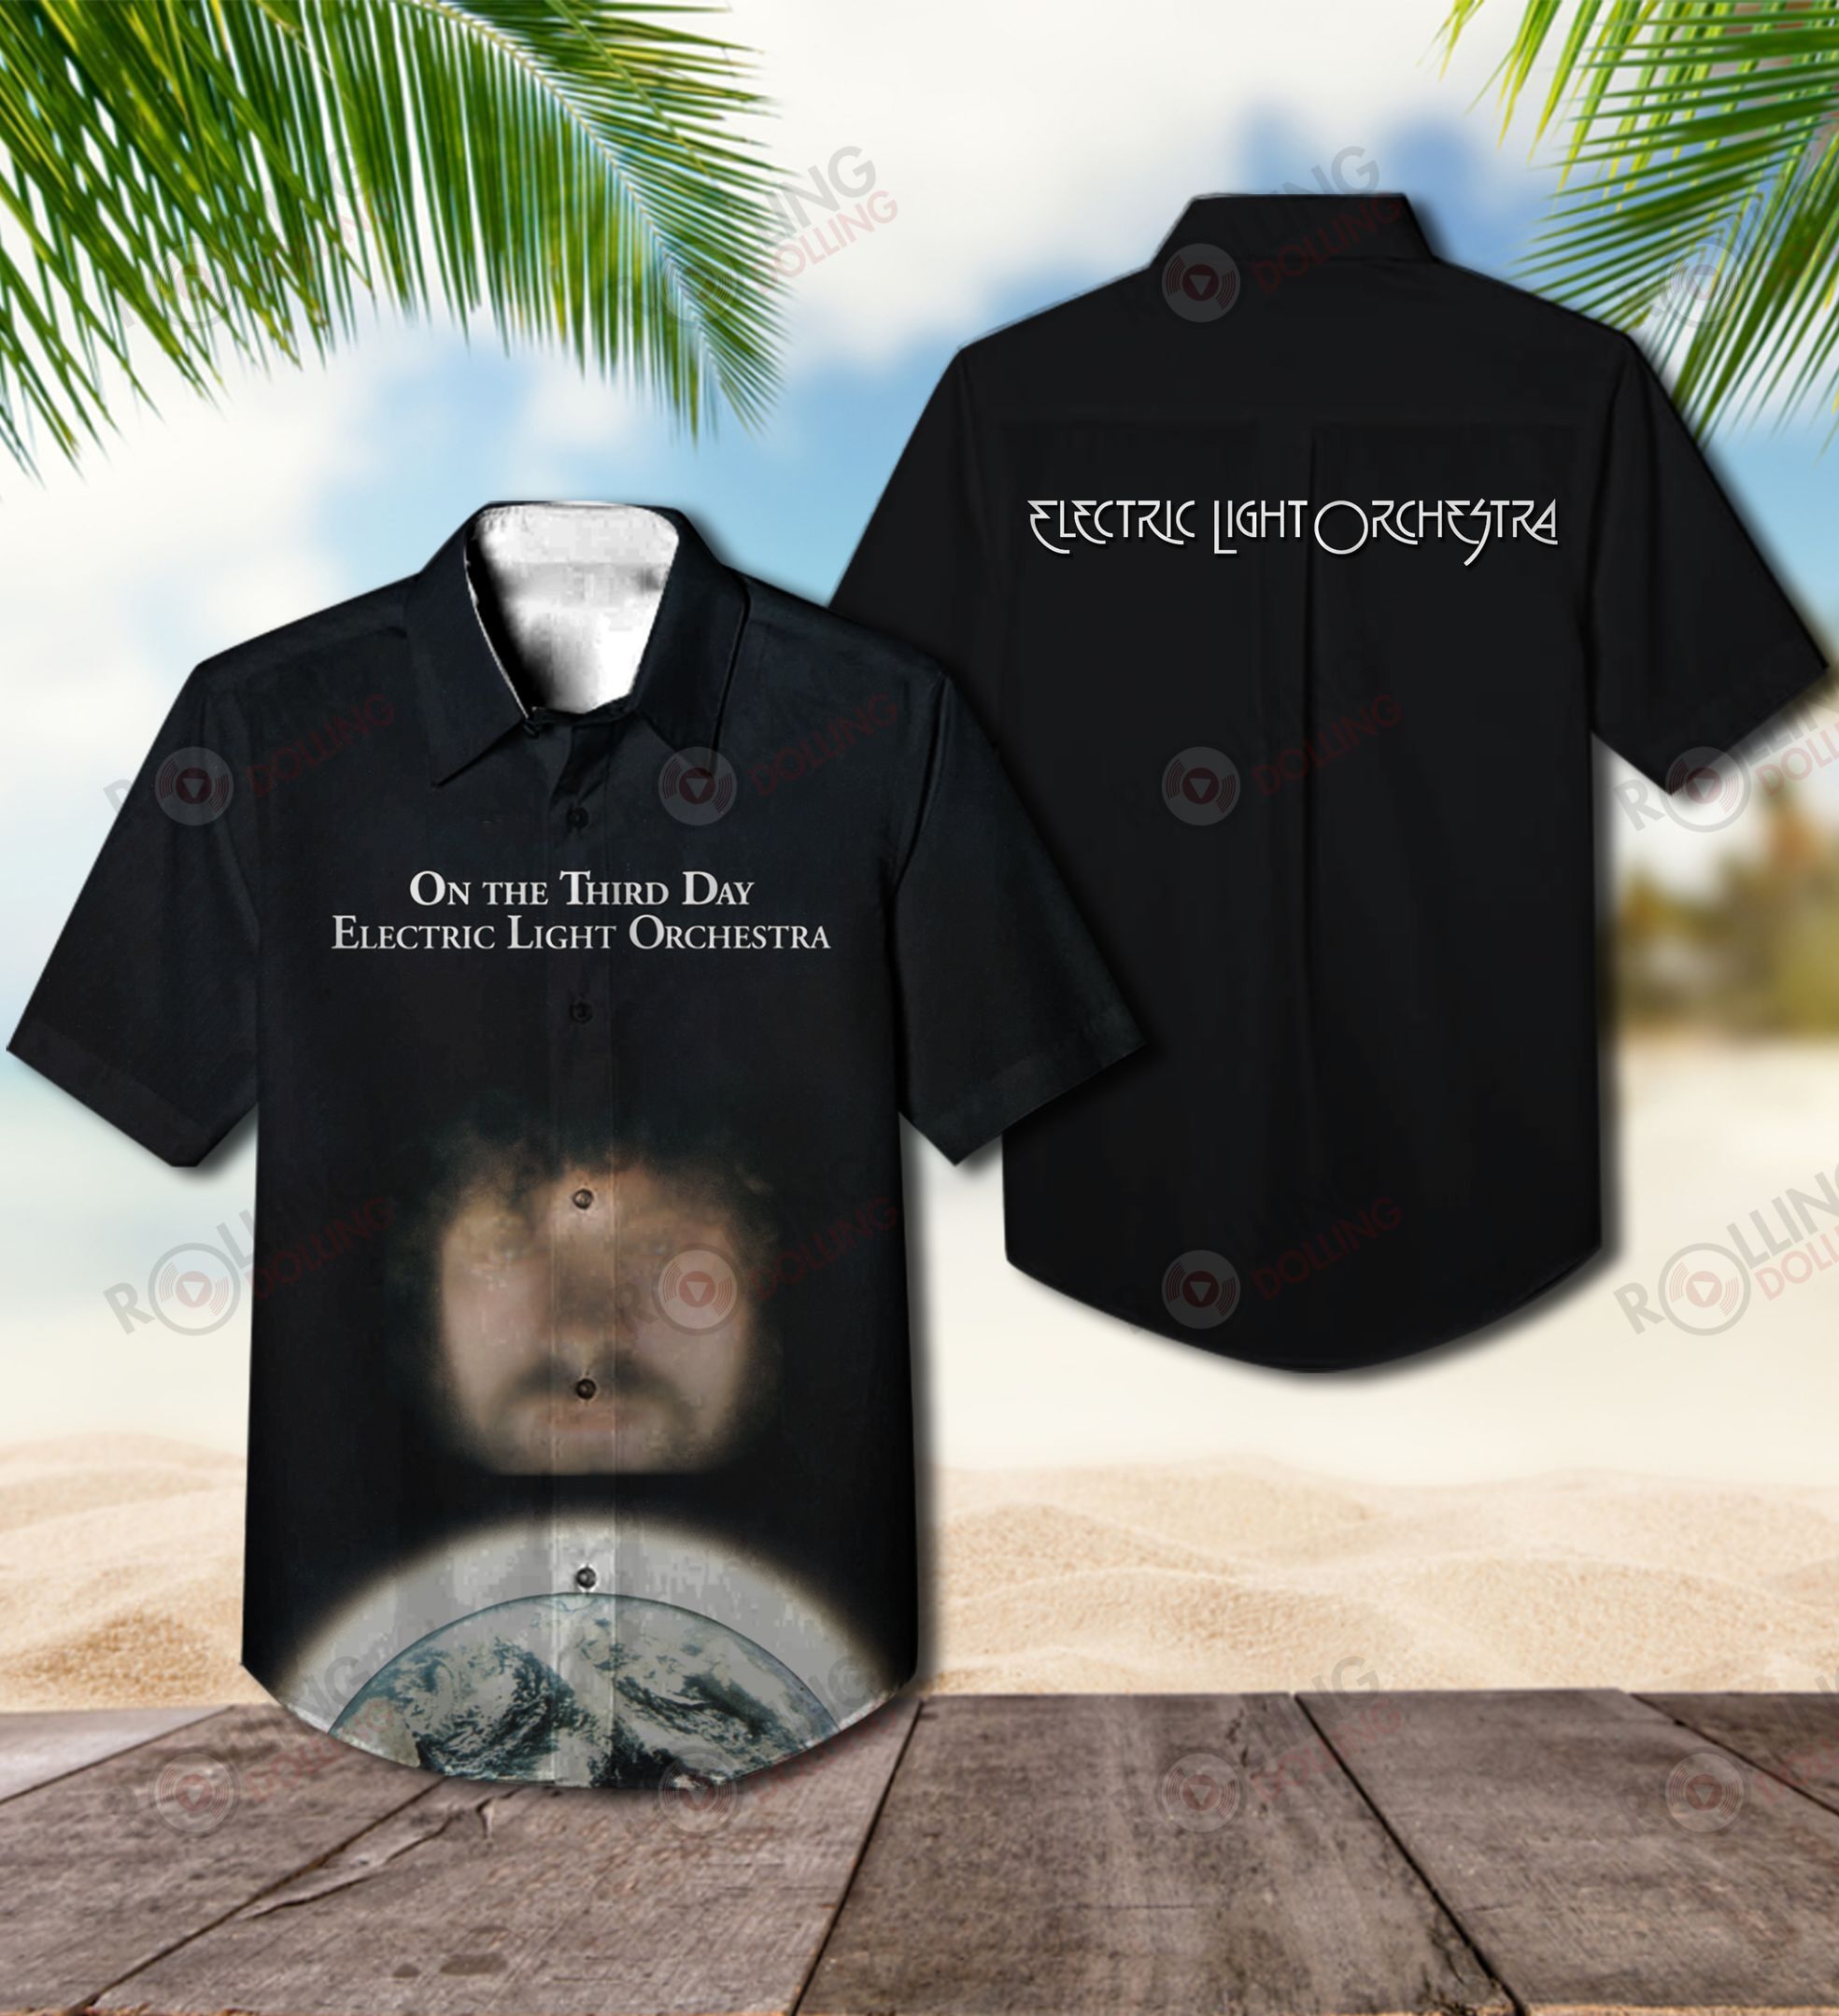 This would make a great gift for any fan who loves Hawaiian Shirt as well as Rock band 138